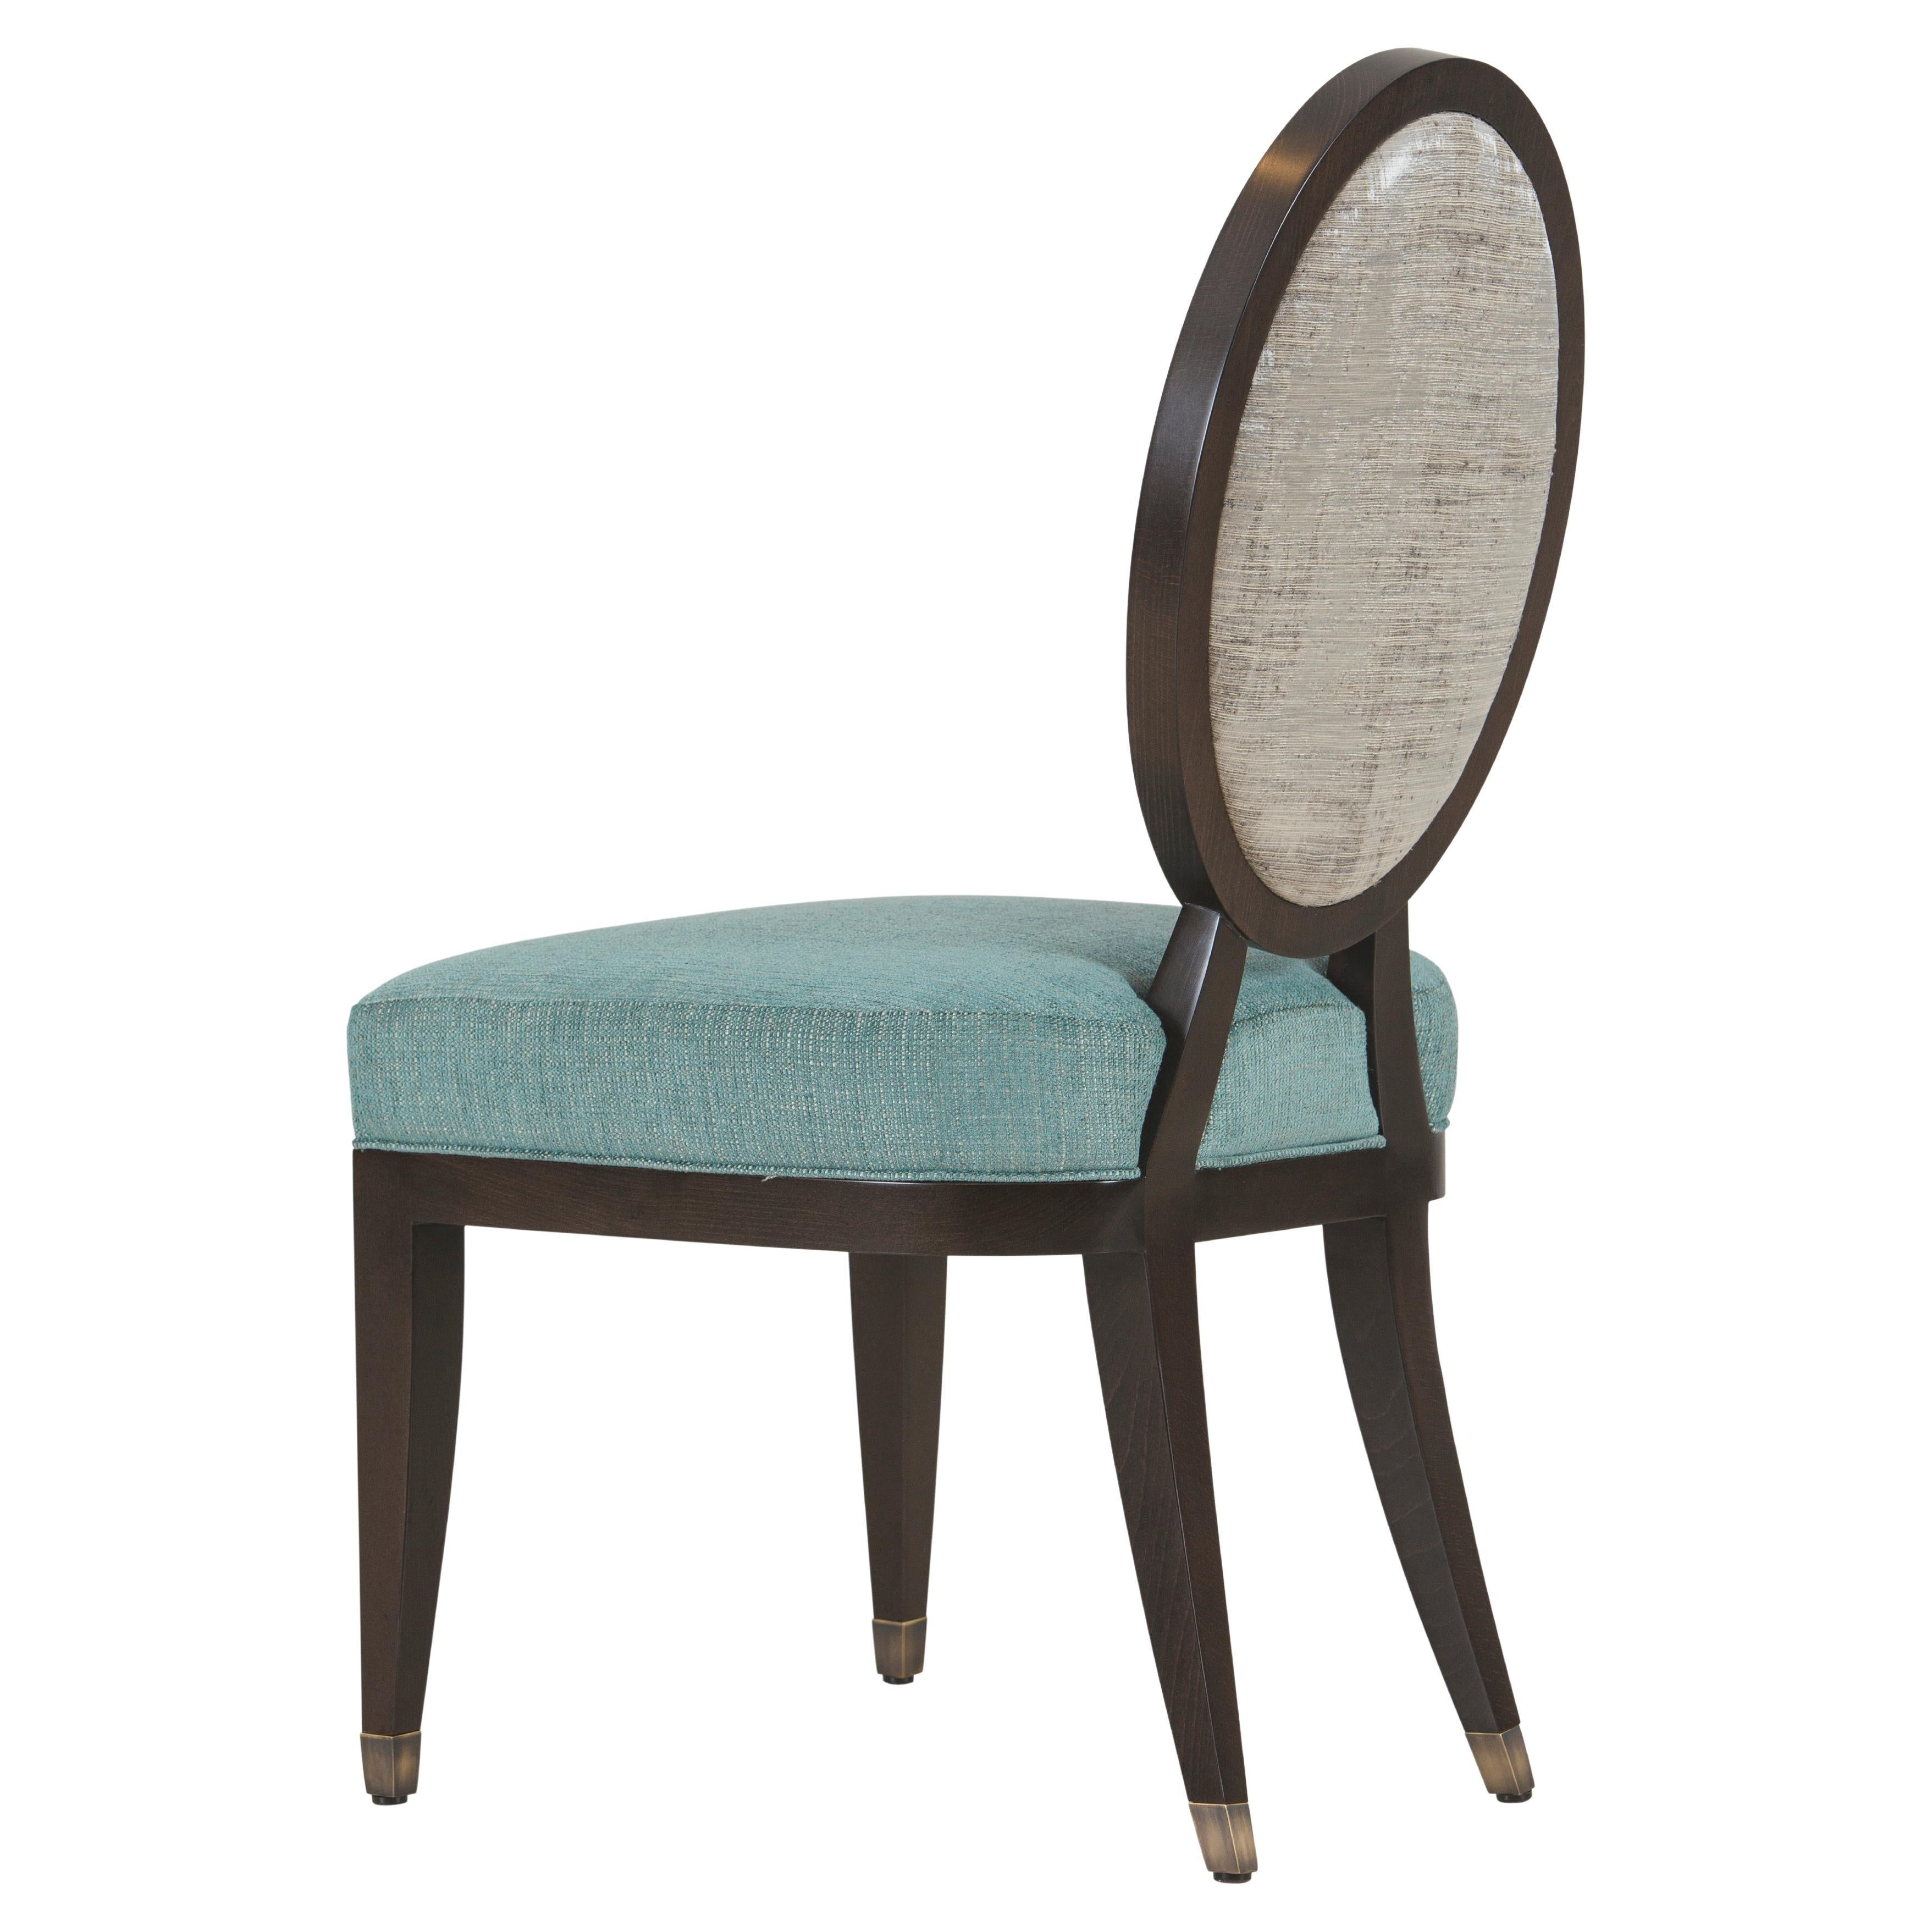 21st Century Neoclassical Ellipse Chair Handcrafted in Portugal by Greenapple